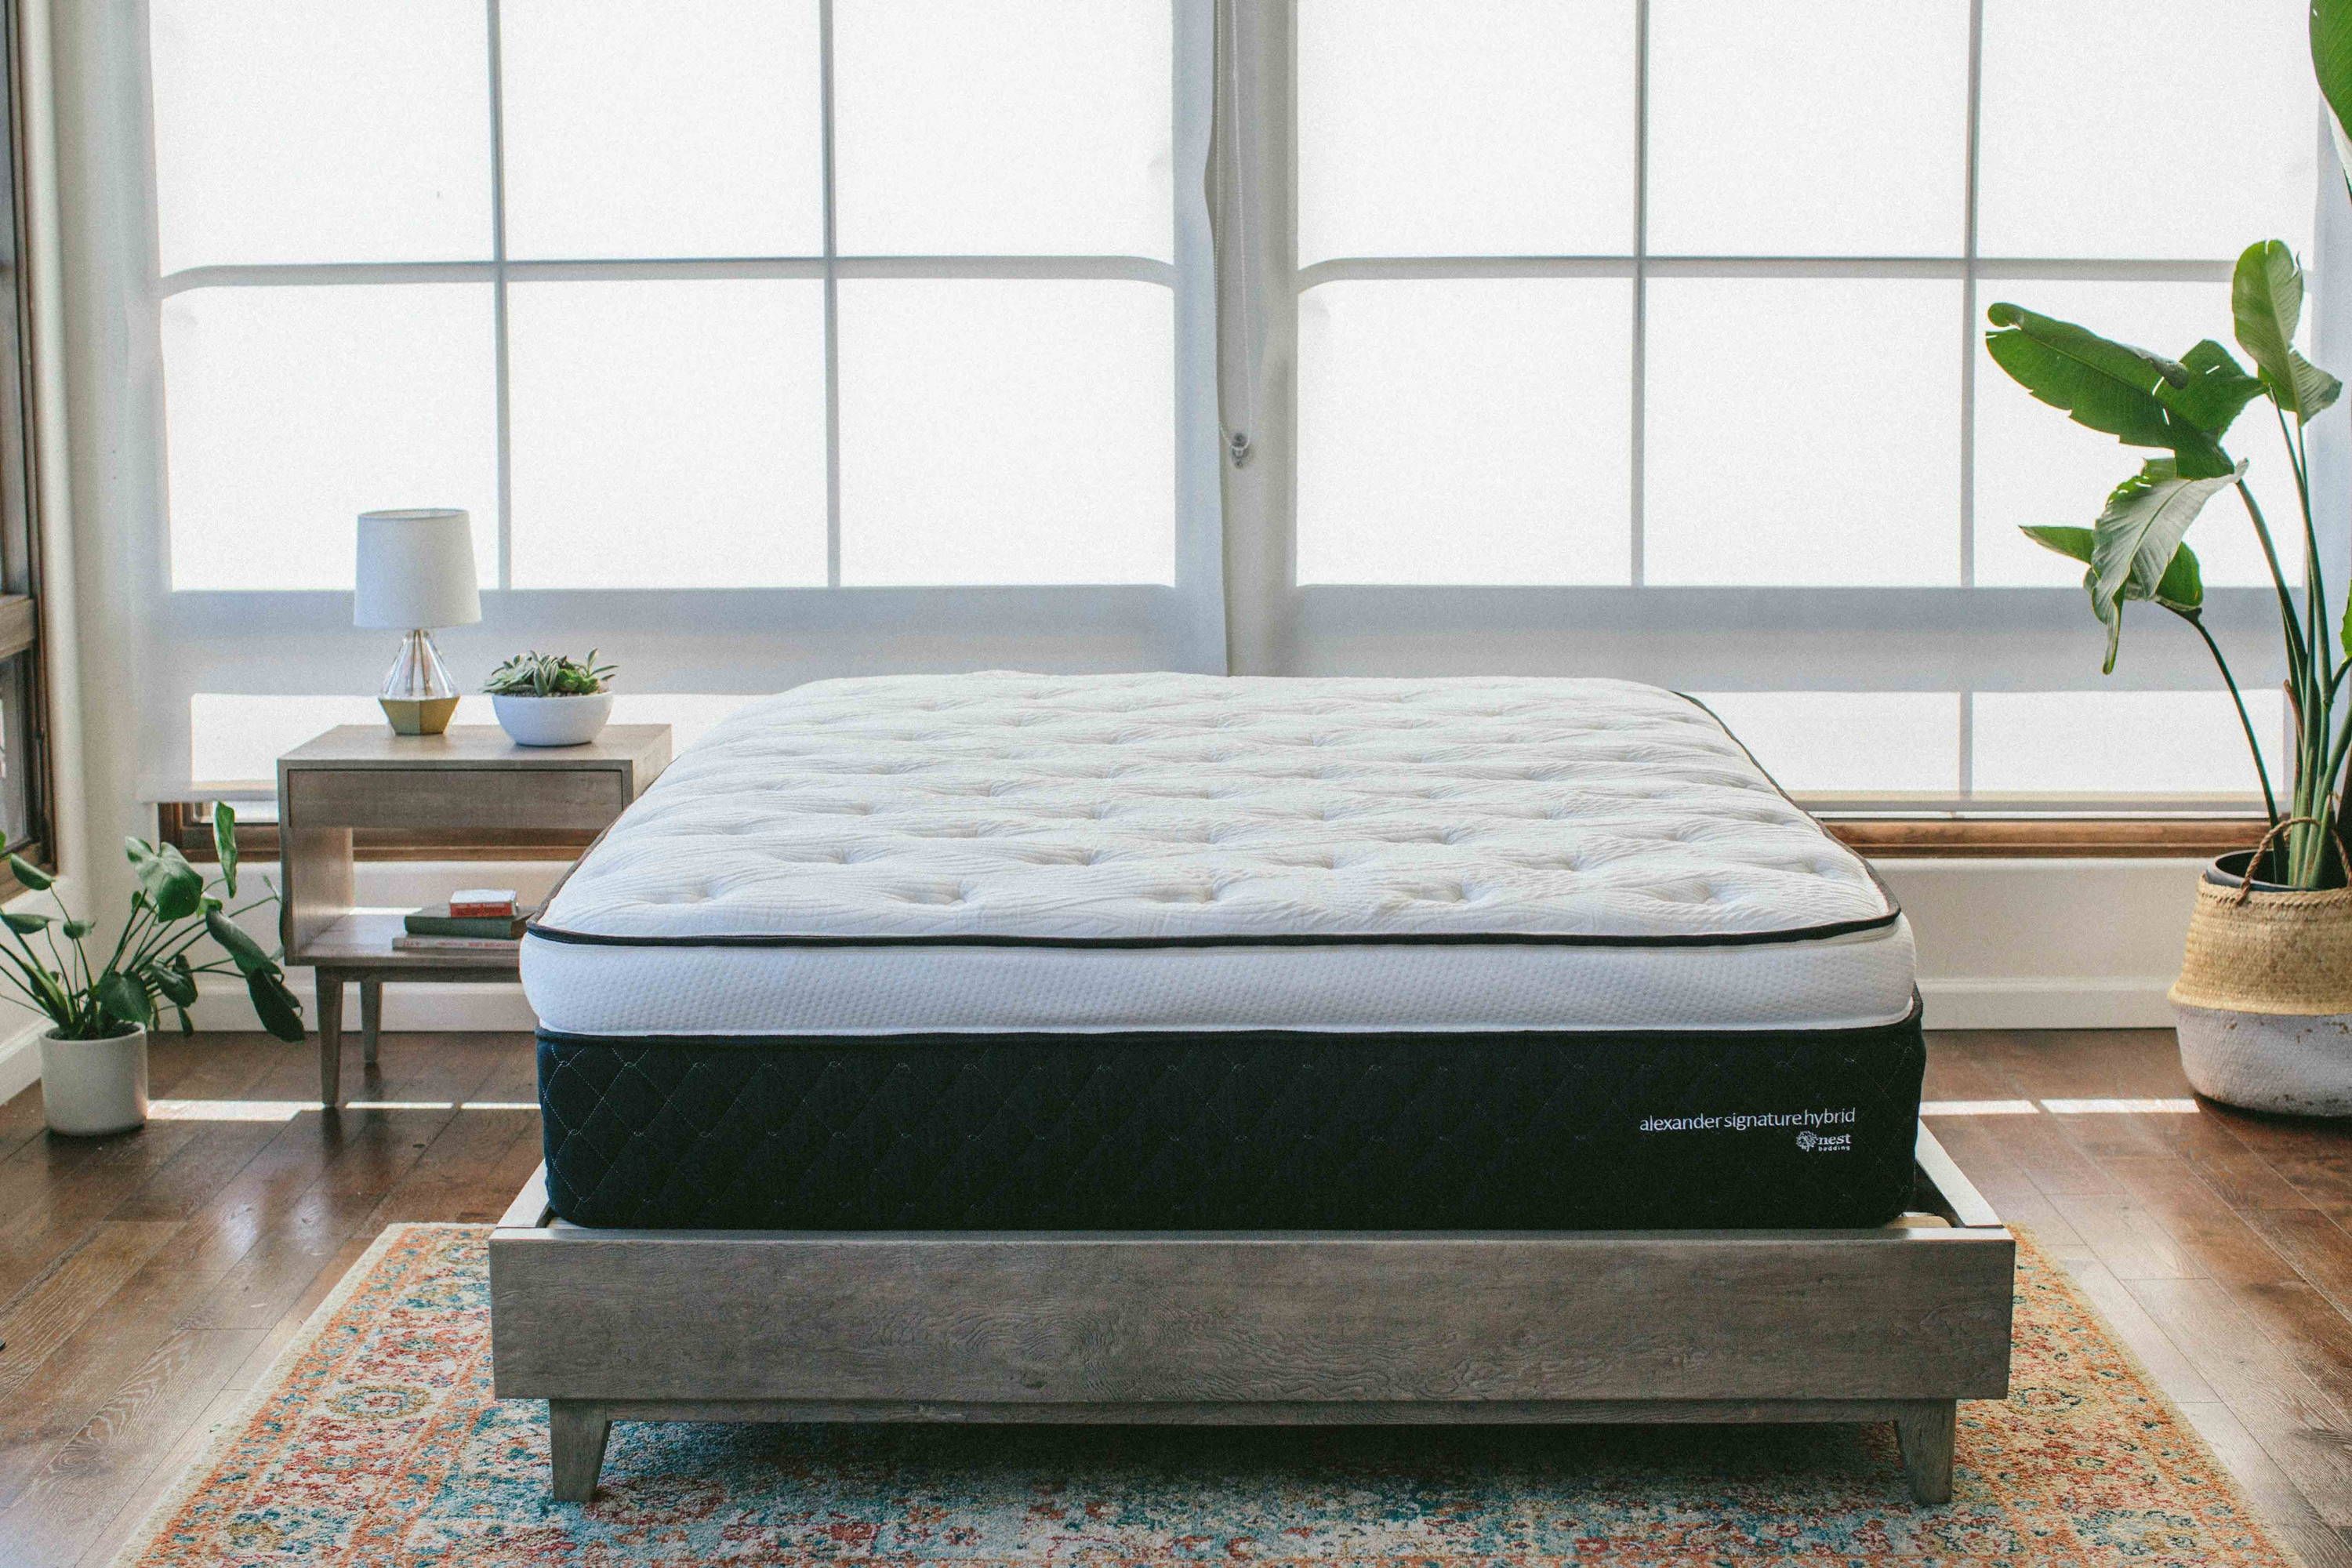 Guaranteed The World's Best Mattress Carrier . One Size Fits All Easy Carry 